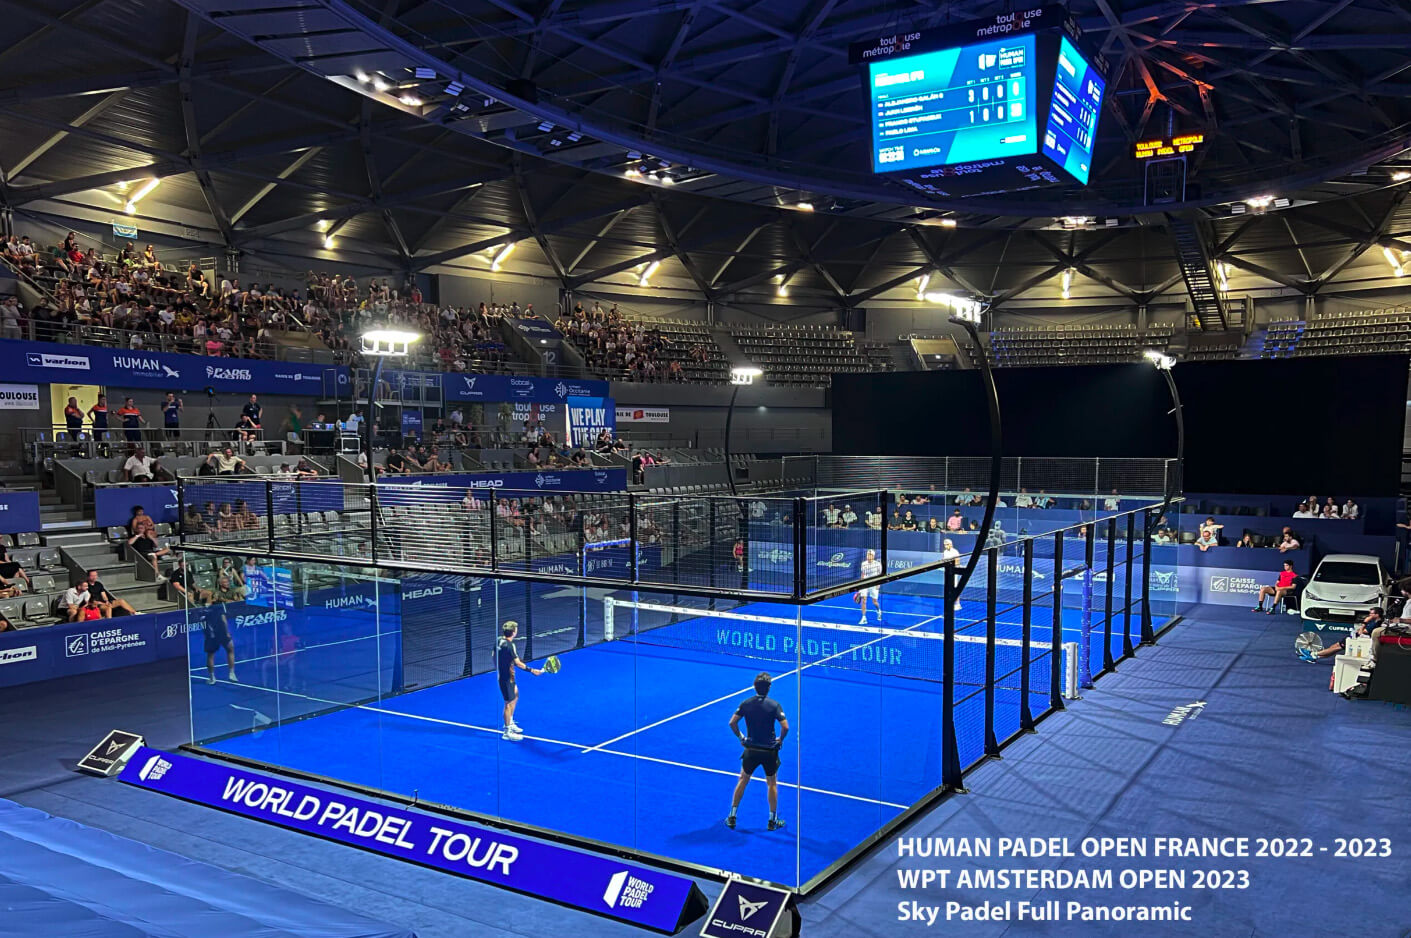 A TURNKEY PADEL CENTRE